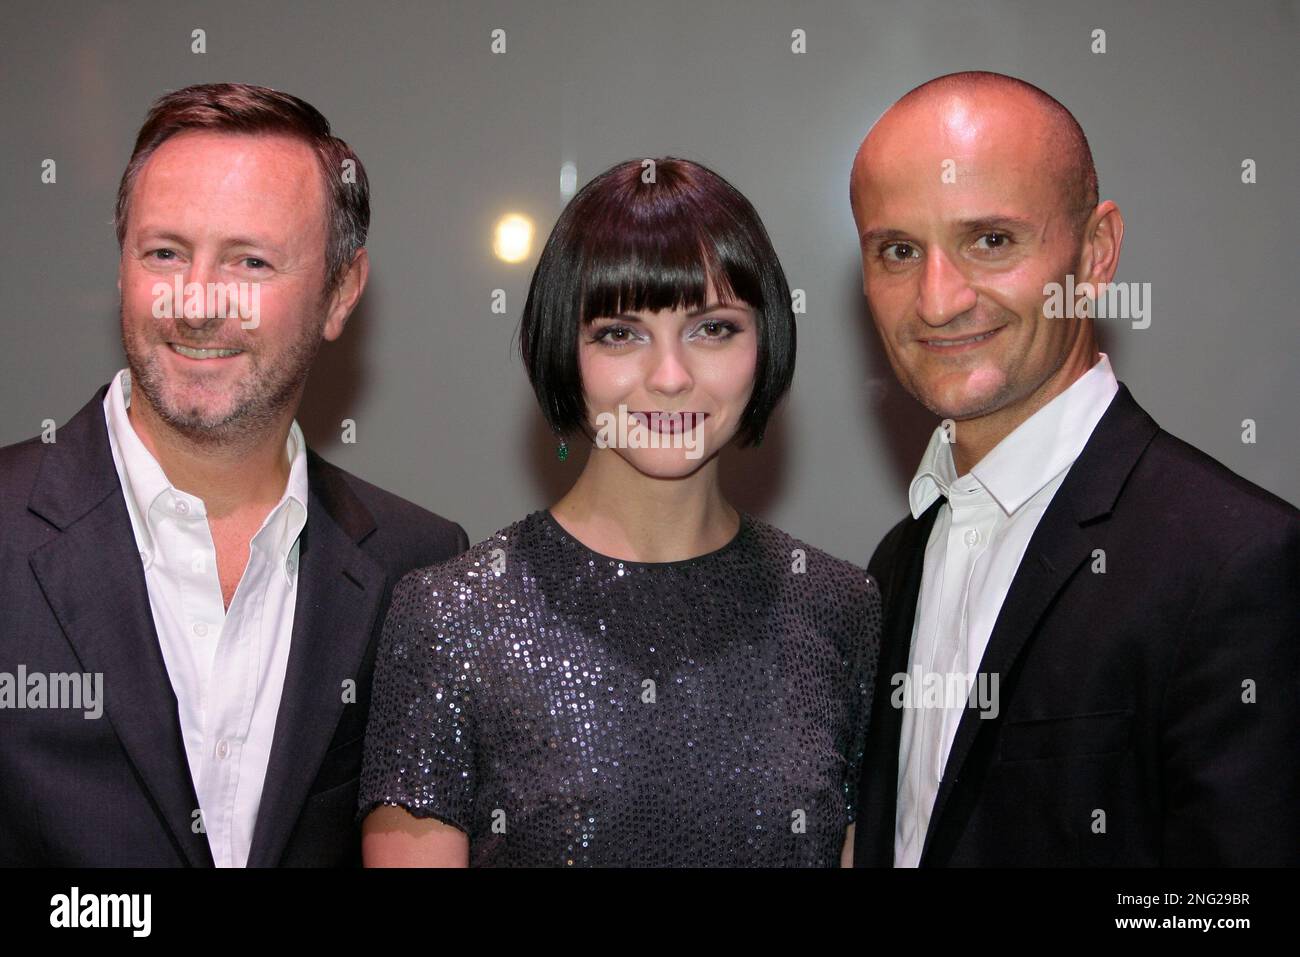 Actress Christina Ricci, center, poses with Kevin Carrigan, left, the  Creative director of ck Calvin Klein and Mark Carrasquillo, the Global  Make-up artist of ck Calvin Klein beauty, in Milan, Italy, Thursday,